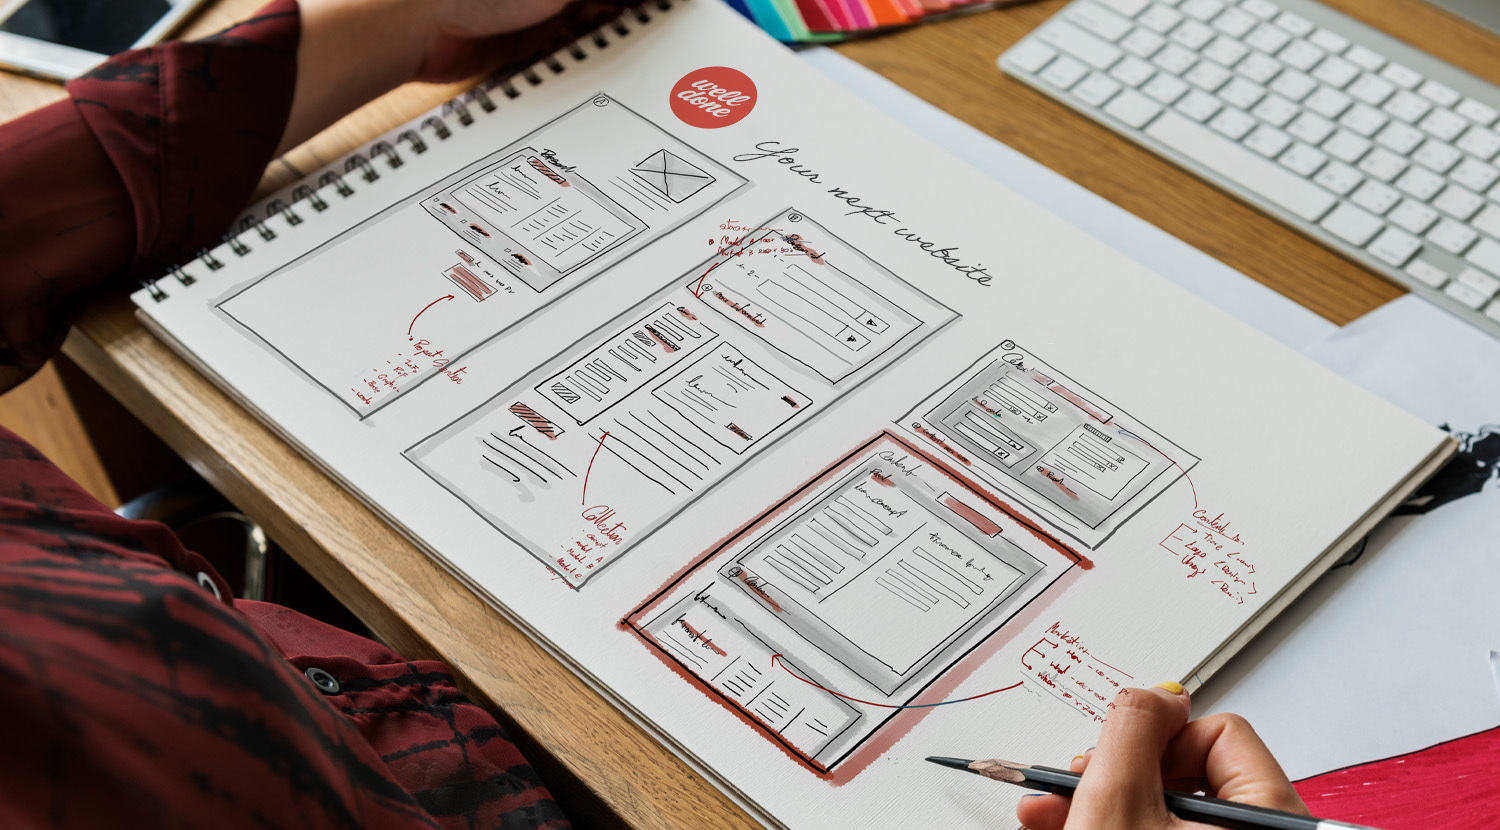 Website wireframe sketches in a notebook